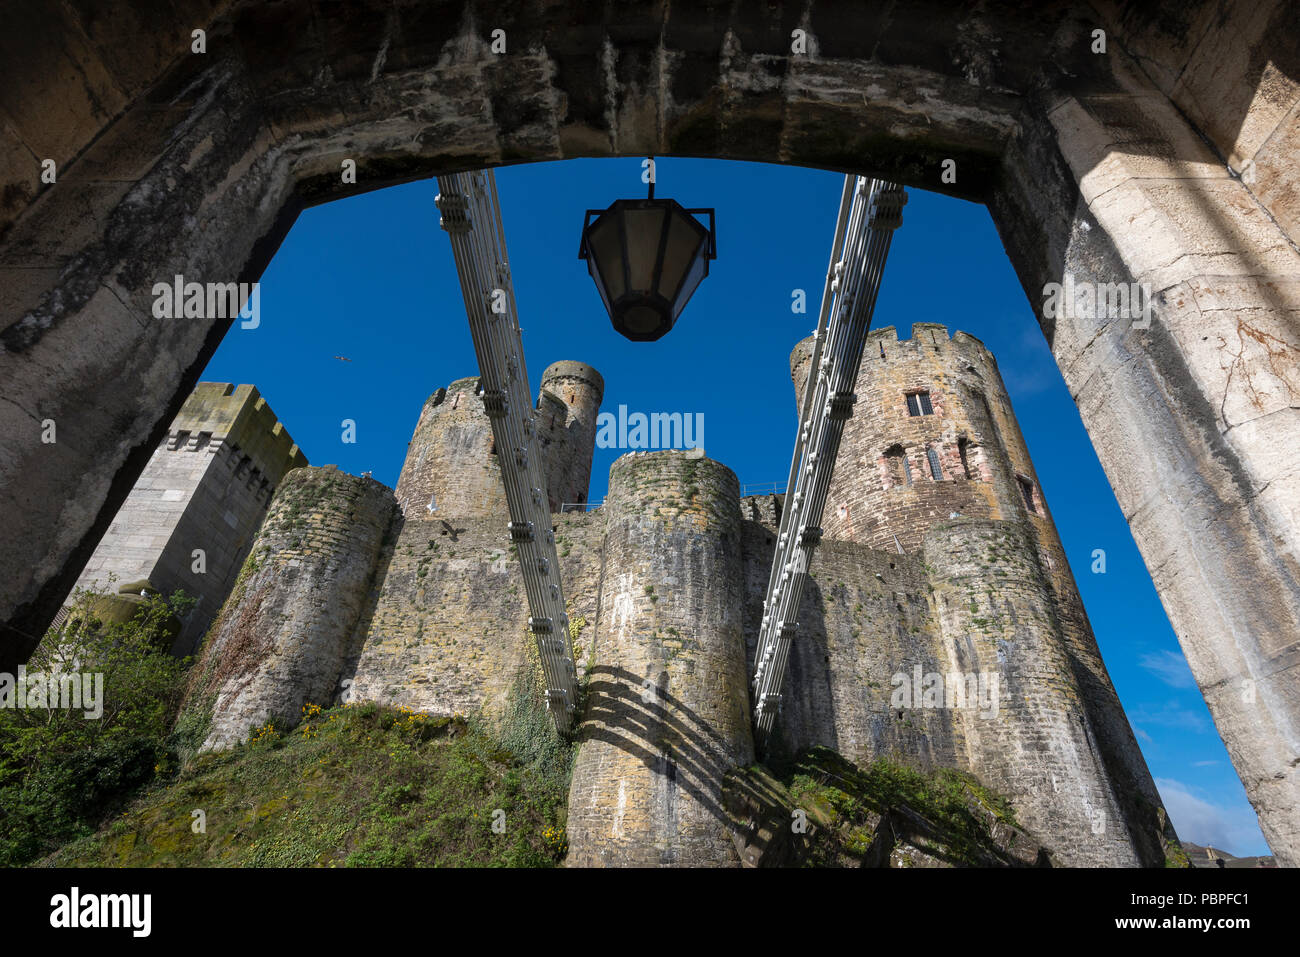 View of Conwy castle from the end of the famous suspension bridge, Conwy, North Wales, UK. Stock Photo